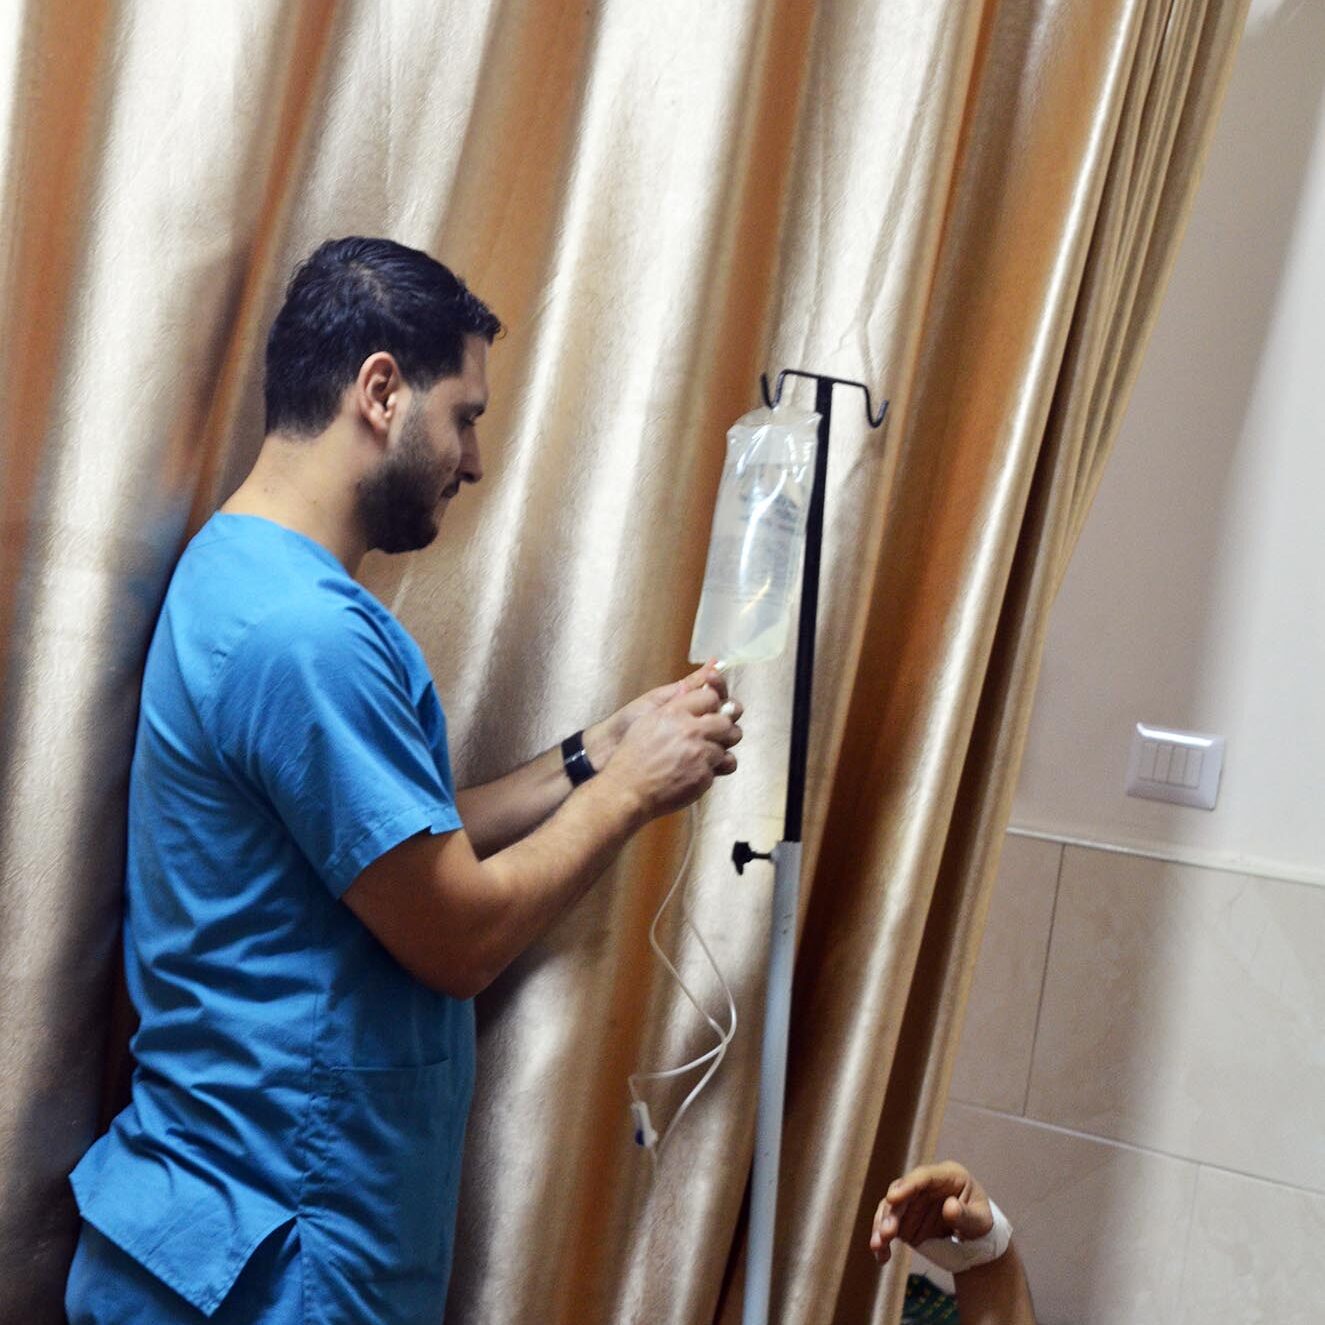 A nurse dilutes an antibiotic in the saline bag for a patient at Al Quds Hospital.